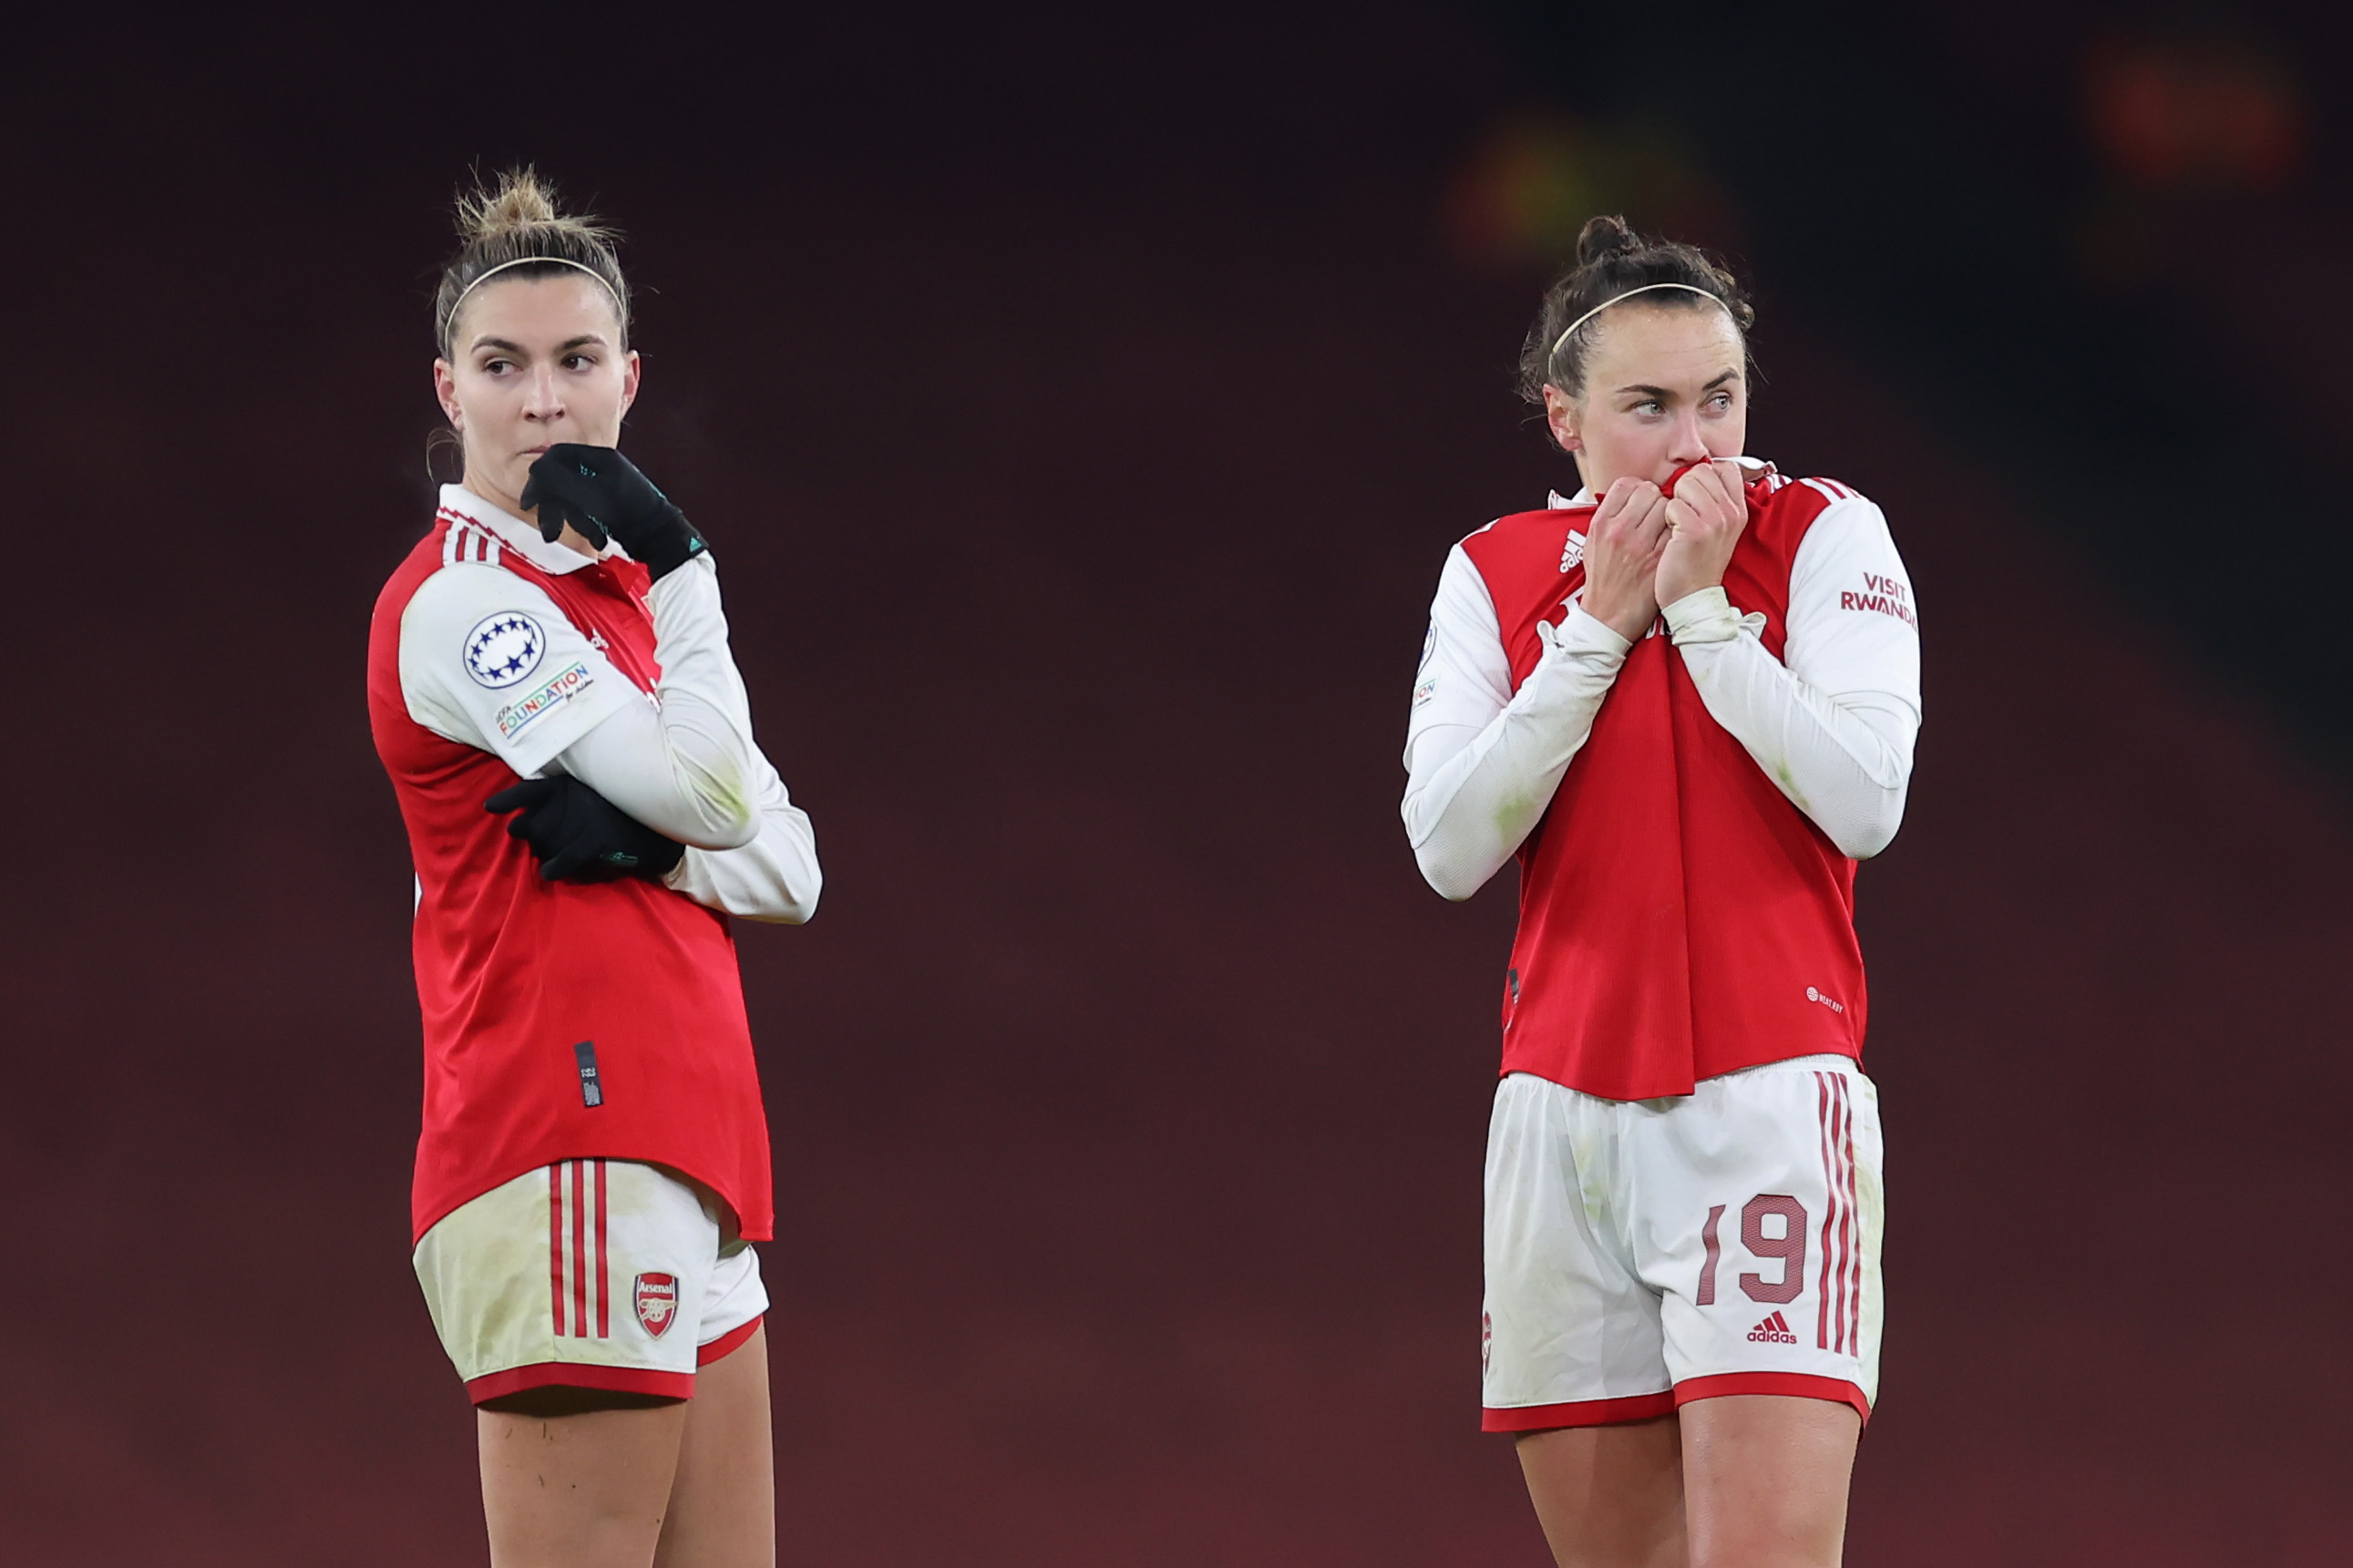 Lock, Socks and Too Many Errors: Analysis of Arsenal Women’s critical defeat to Chelsea